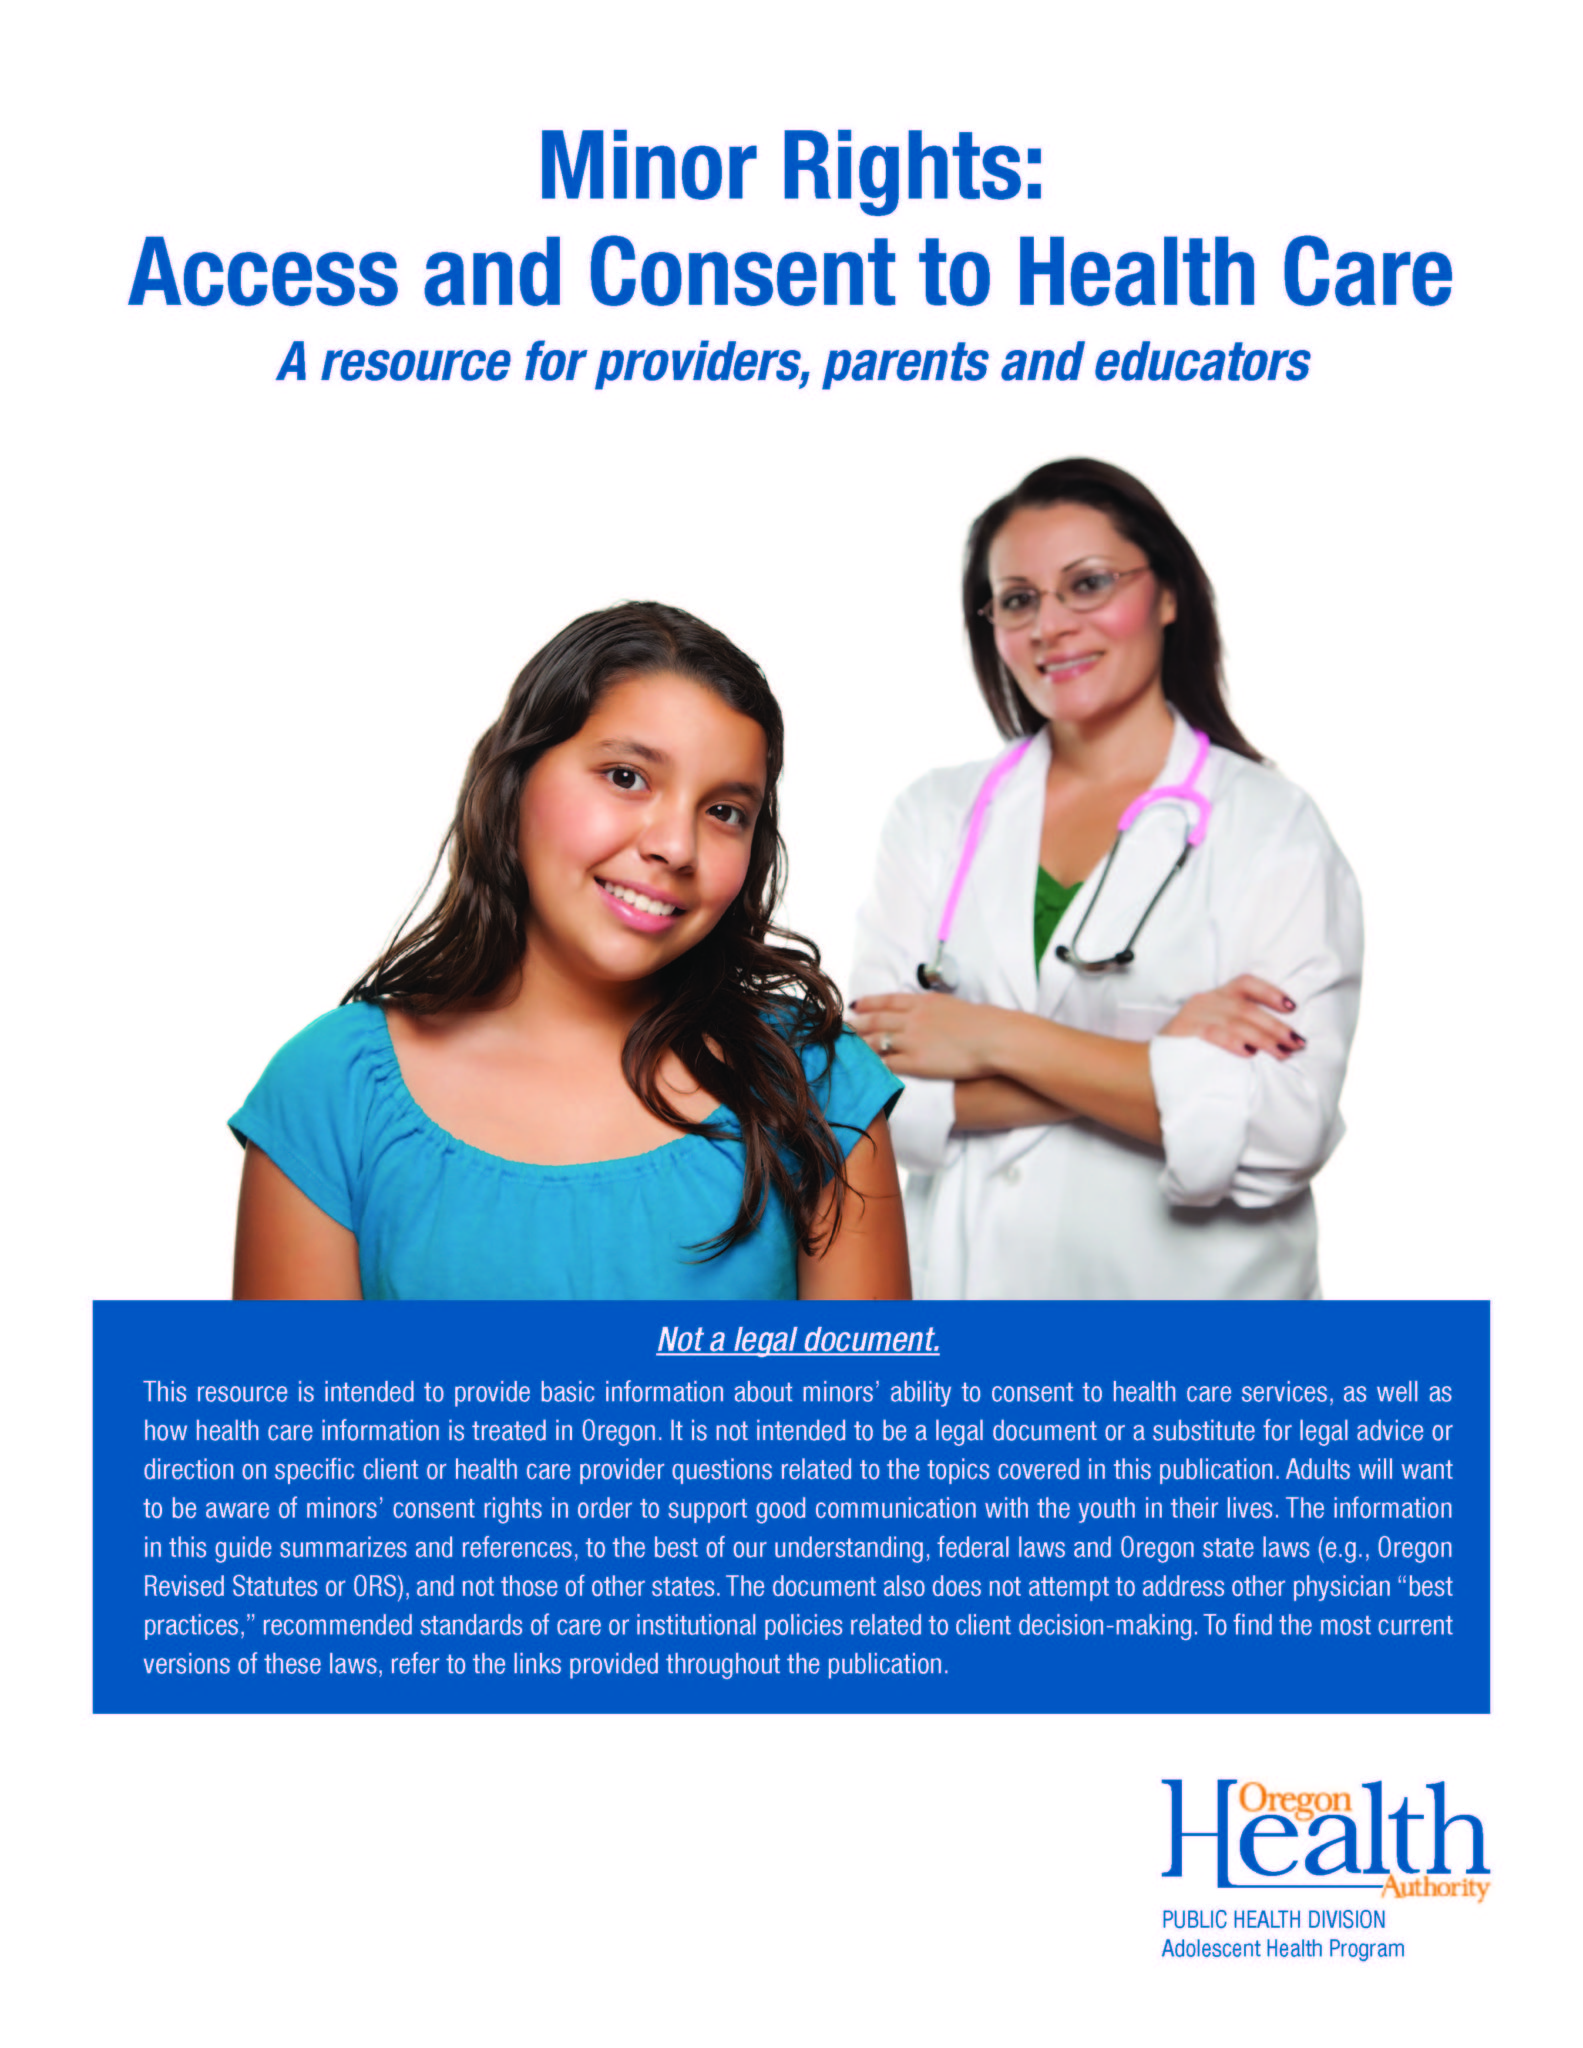 Minor Rights: Access and Consent to Health Care | Oregon Health Authority